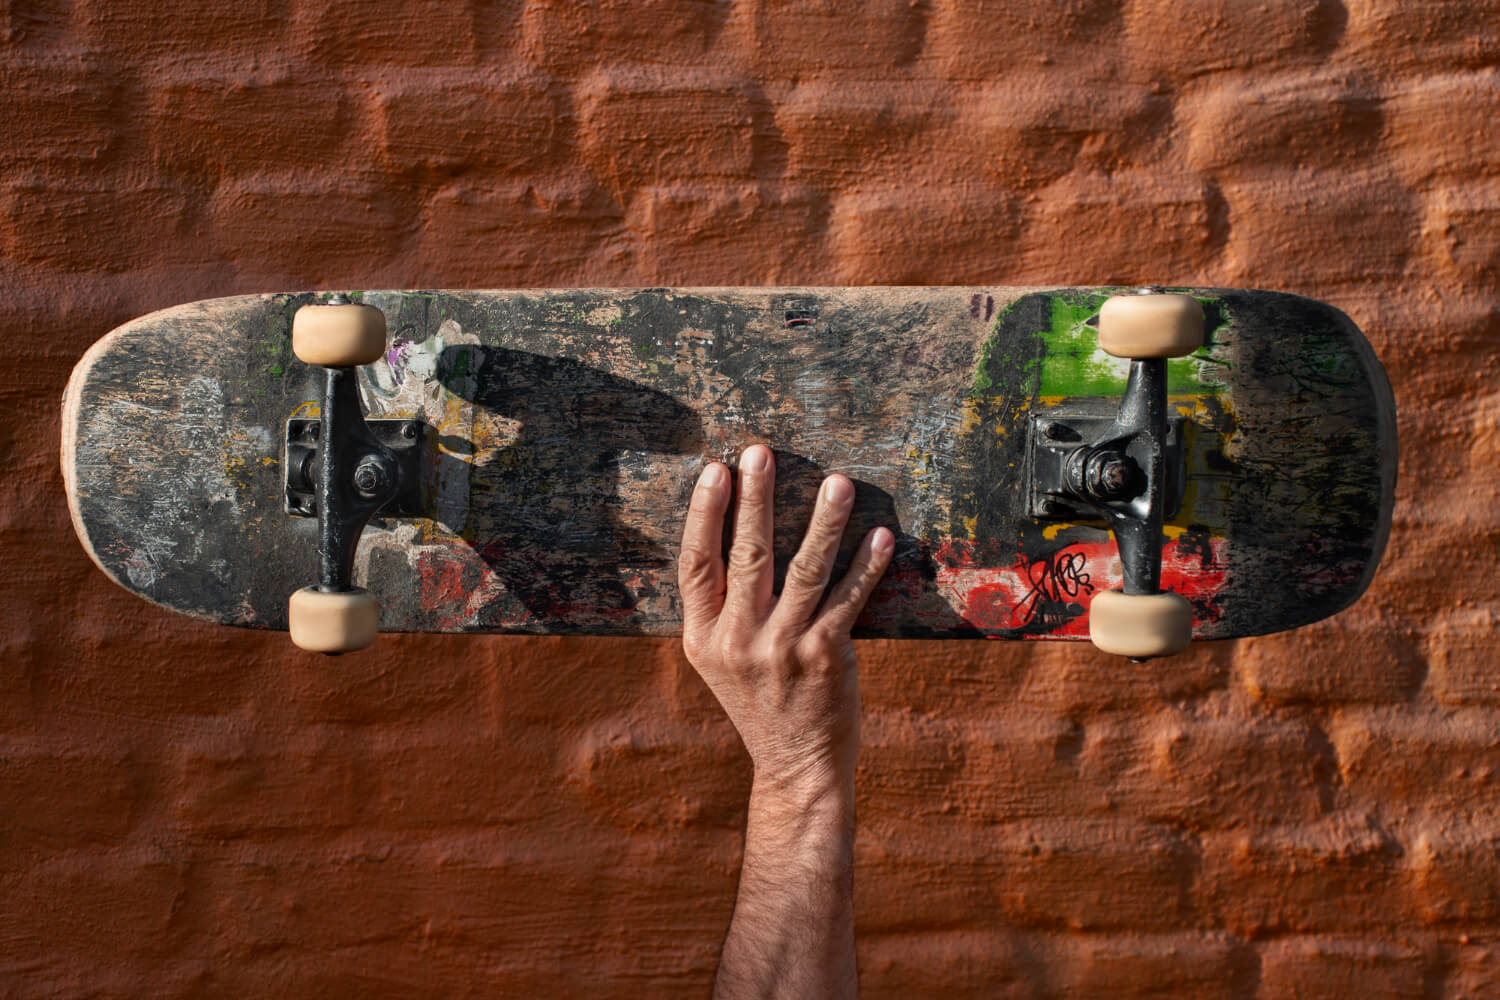 The Impact of Skateboarding Culture on Entrepreneurial Creativity and Risk Management